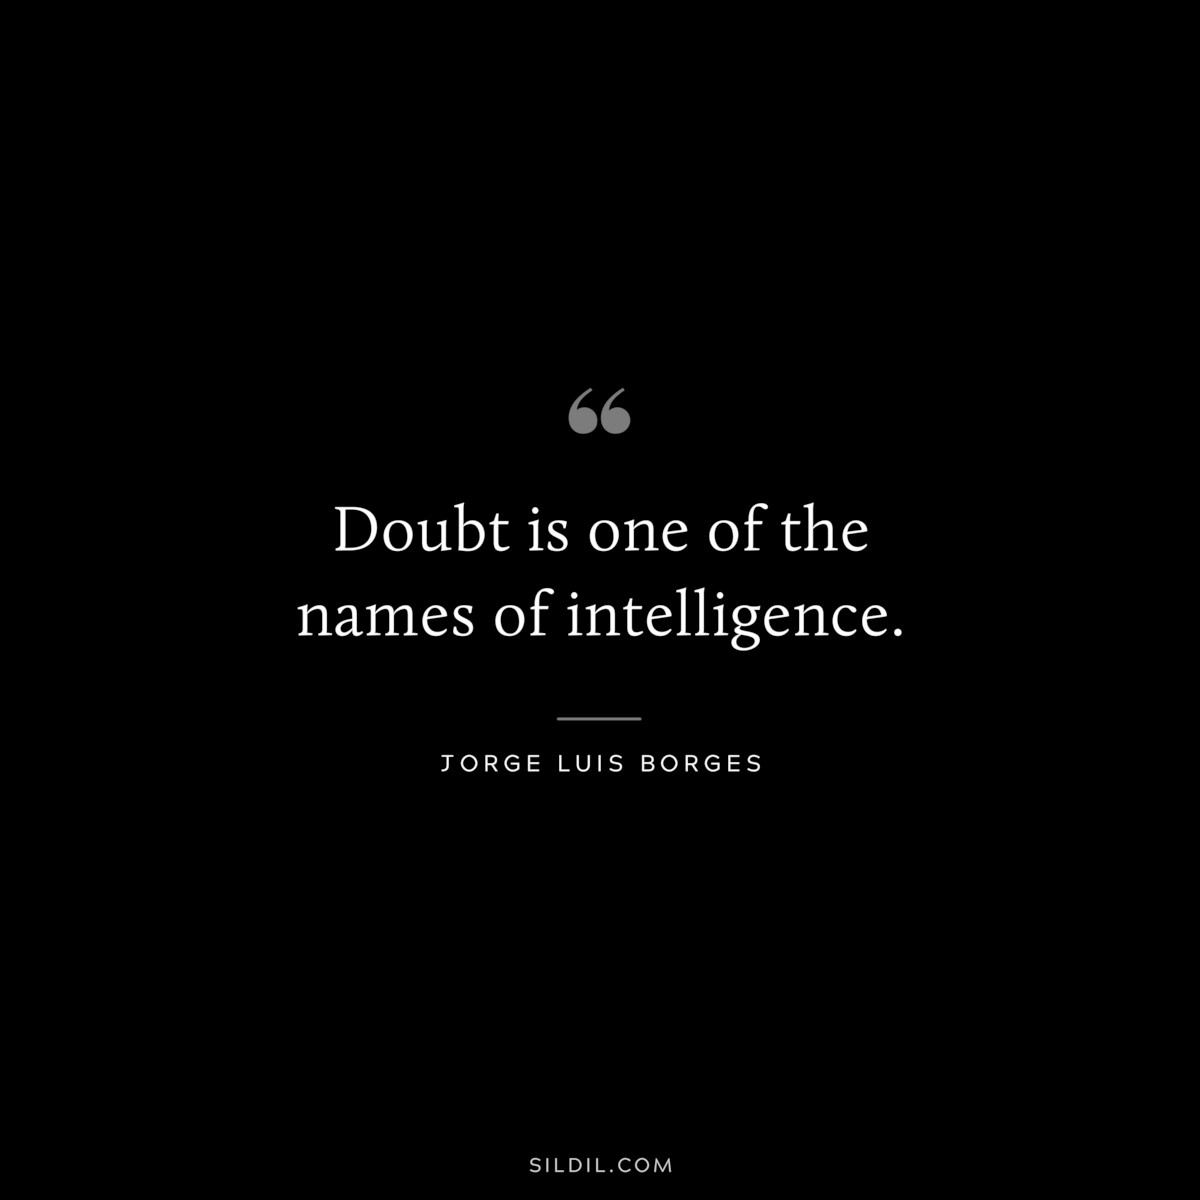 Doubt is one of the names of intelligence. ― Jorge Luis Borges